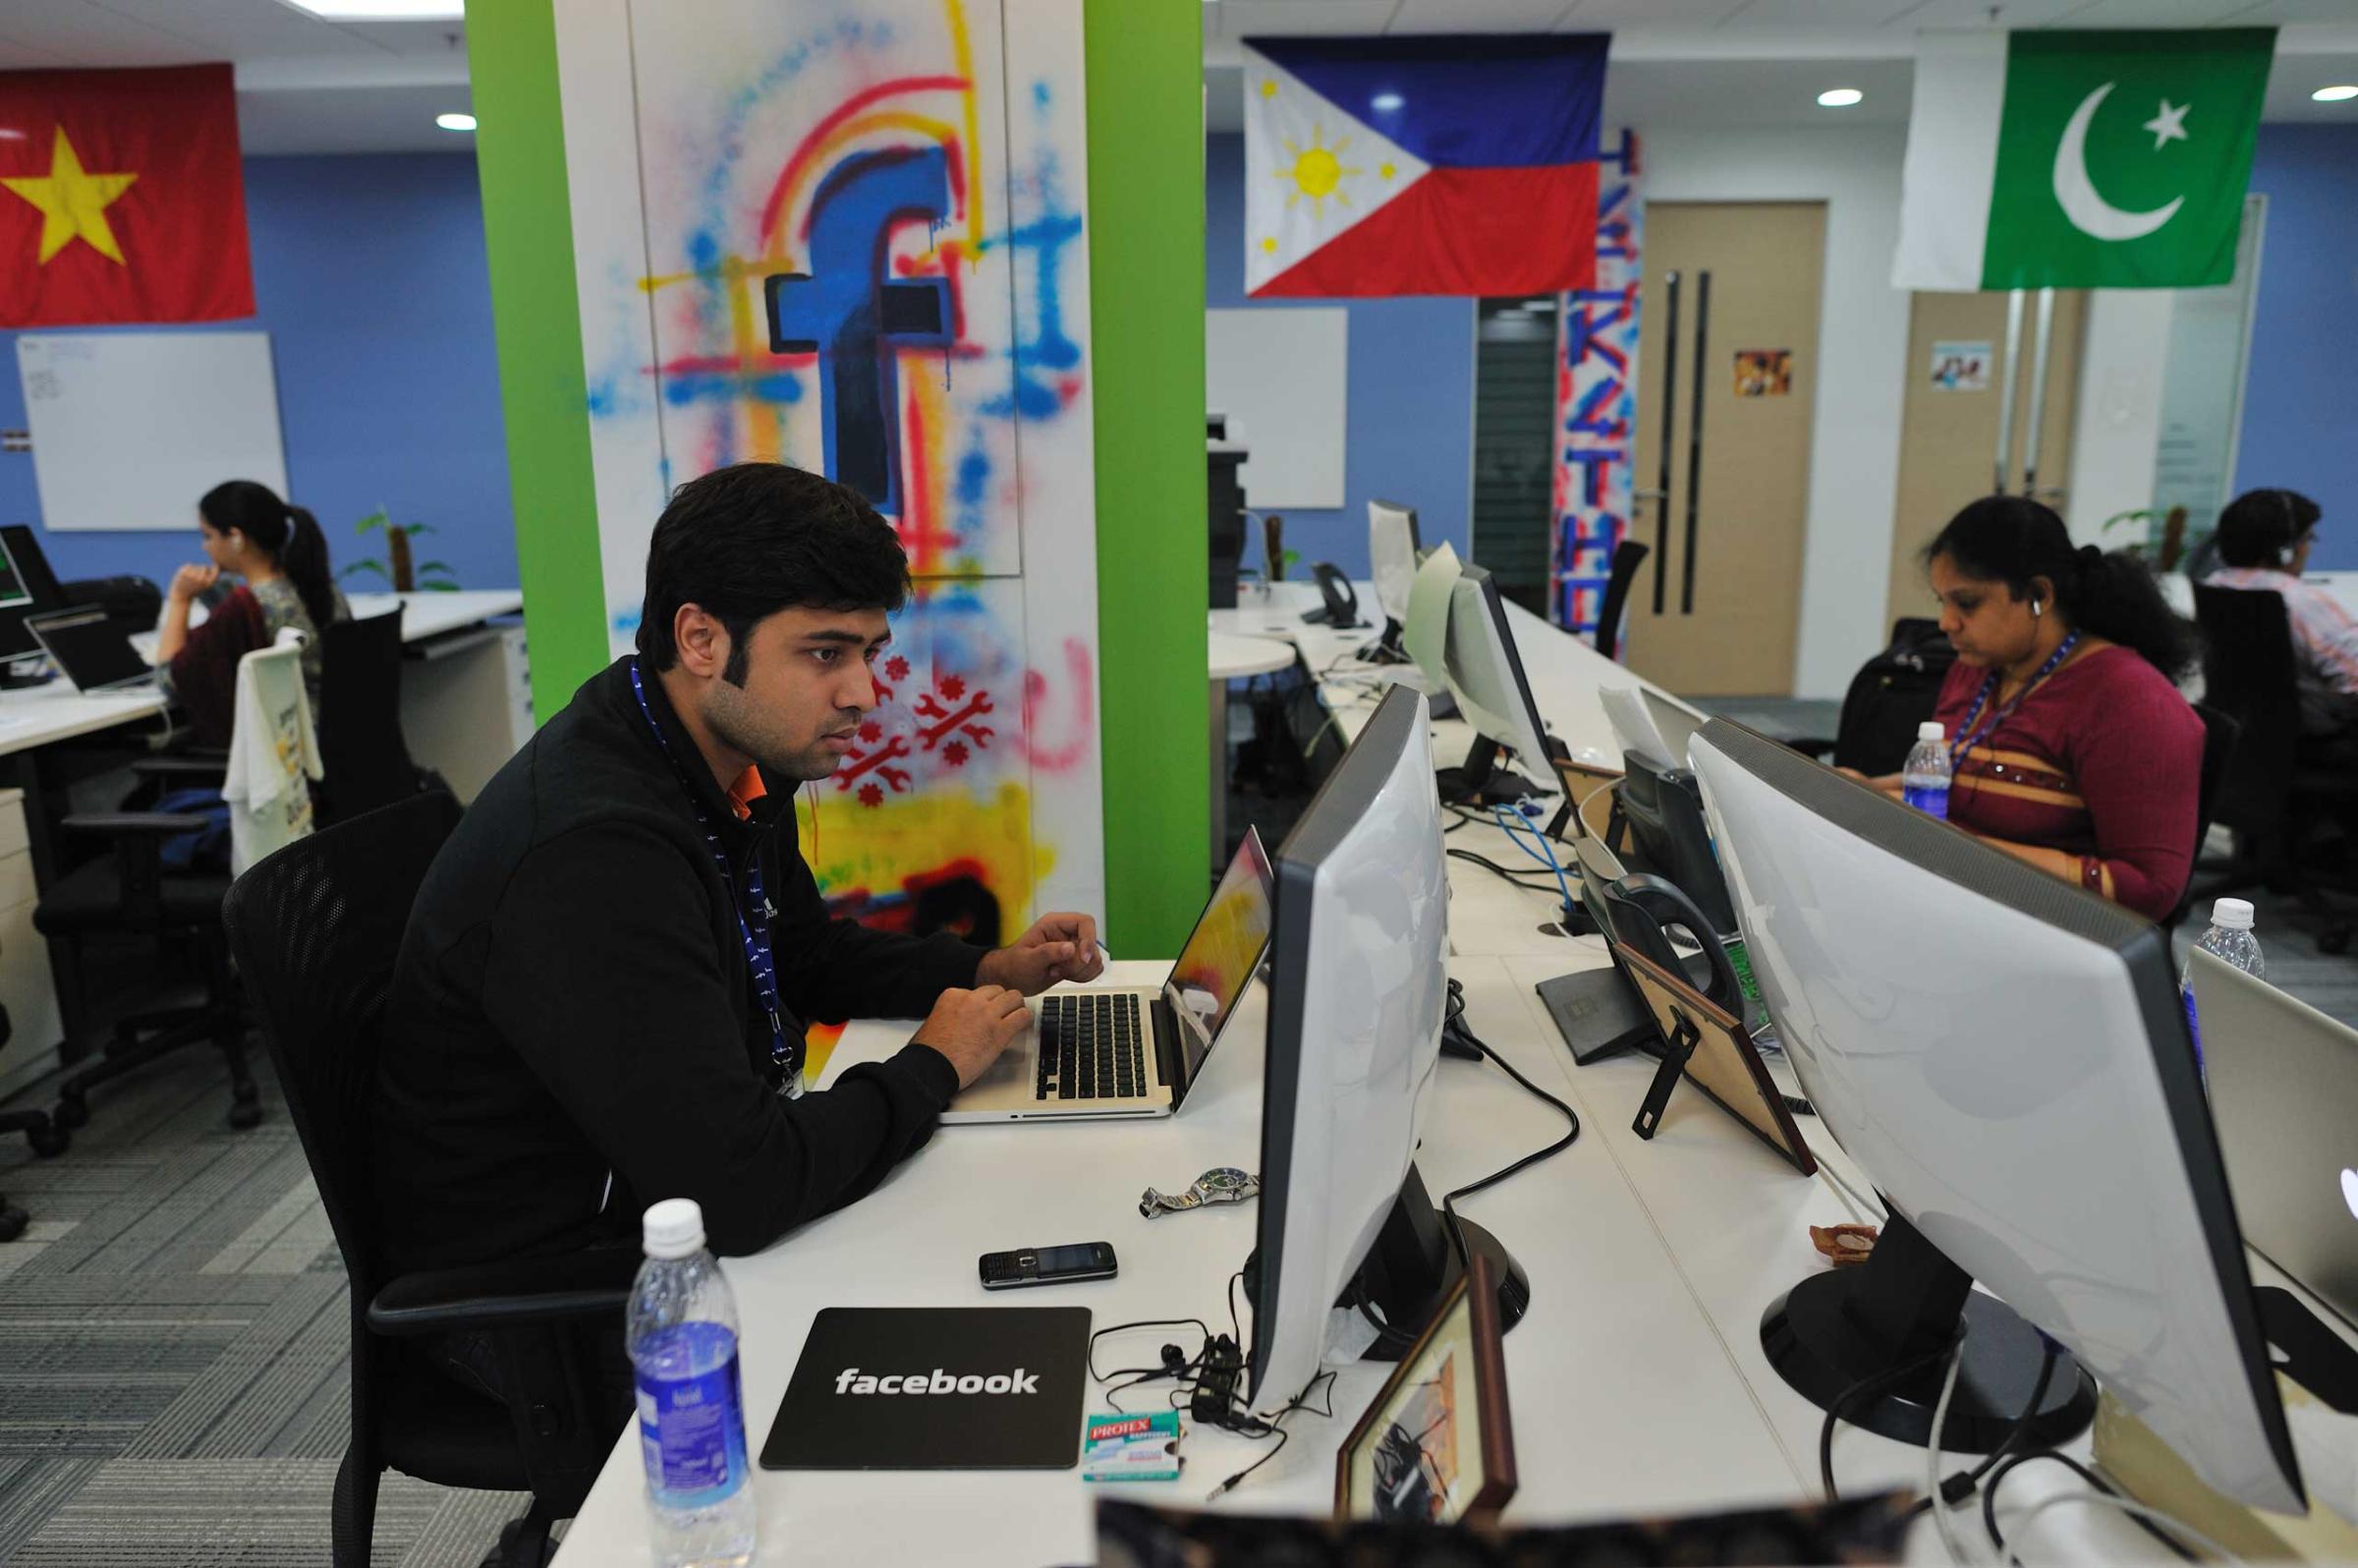 Facebook offices in Hyderabad, India in 2010.Indian and American employees work out of the Facebook offices in Hyderabad, India, December 1, 2010. The offices were recently opened in September 2010, and are presently hiring new employees. (Photograph by Lynsey Addario/Getty Images Reportage)